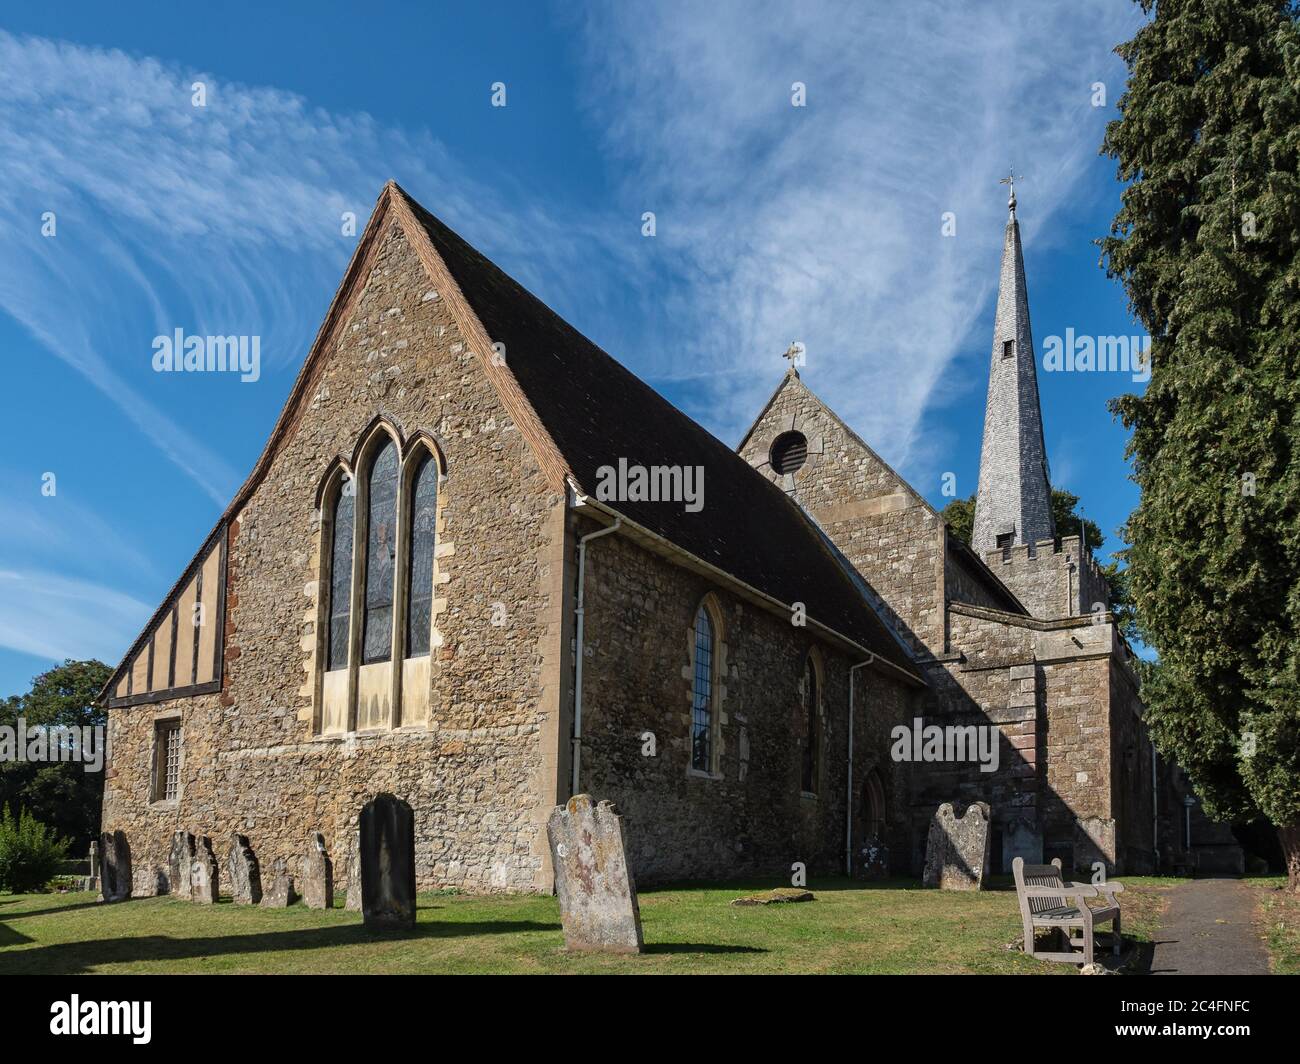 WEST MALLING, KENT, UK - SEPTEMBER 13, 2019:  View of St.Mary the Virgin Parish Church in the High Street Stock Photo